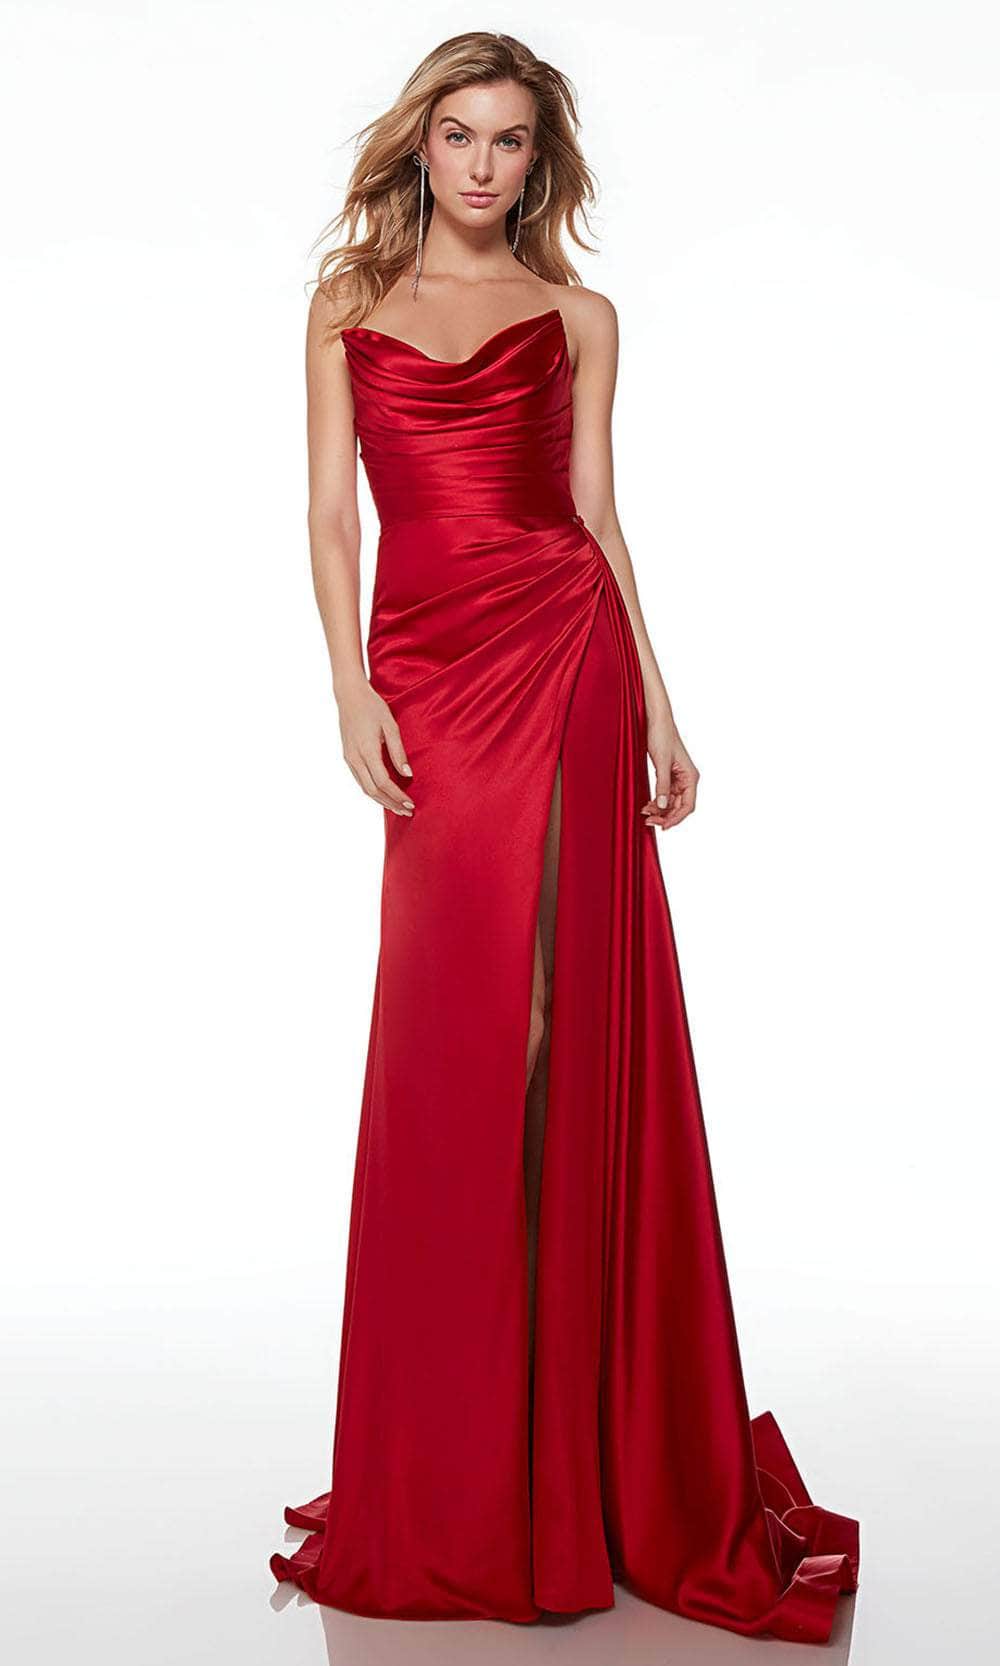 Alyce Paris 61571 - Satin Mermaid Prom Dress Special Occasion Dress 000 / Red